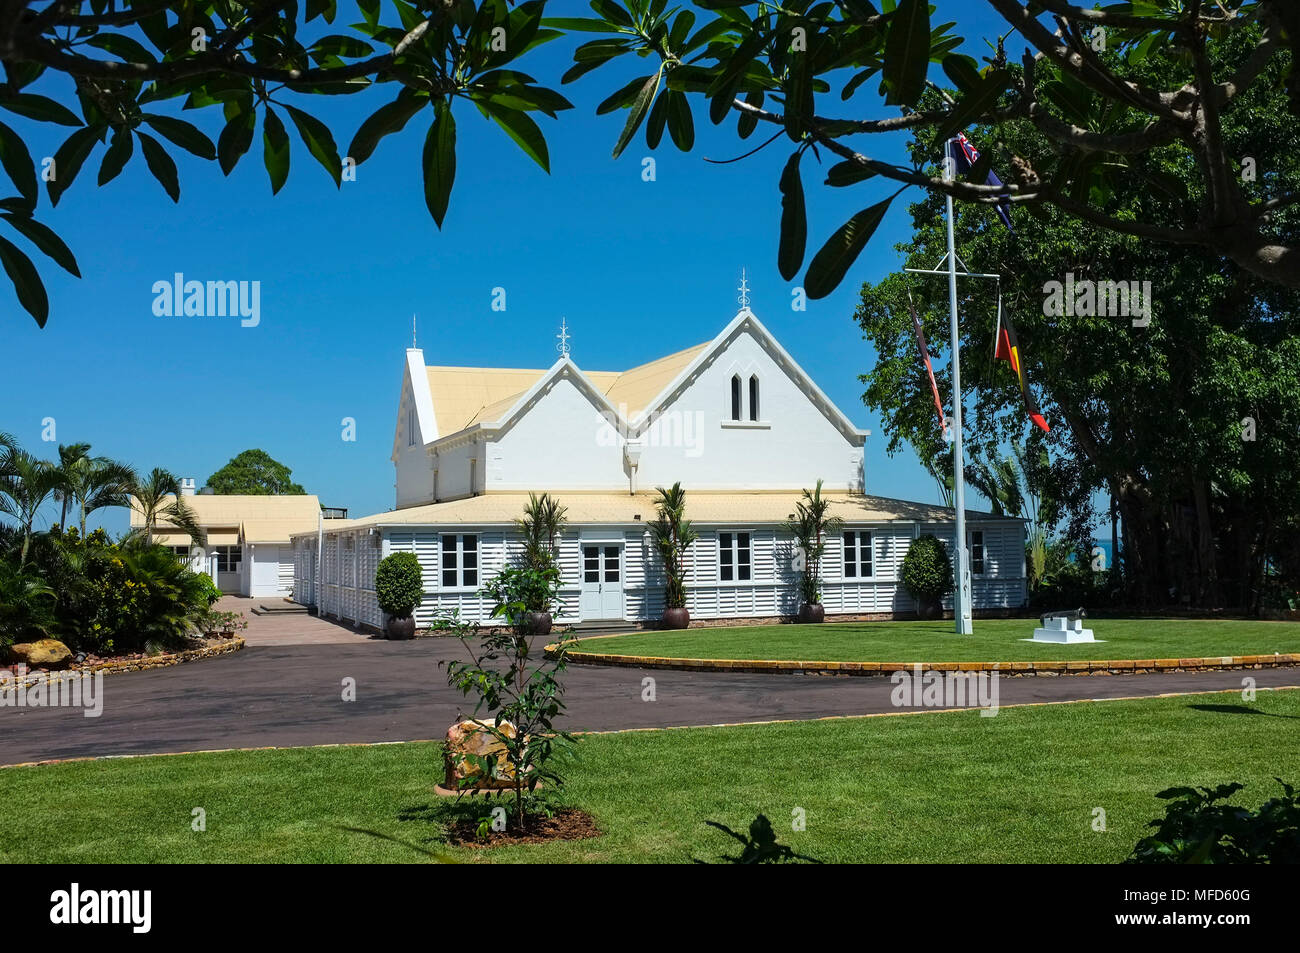 The Northern Territory Government House, in Darwin, Northern Territory, Australia. The house is the residence of the Northern Territory Administrator. Stock Photo